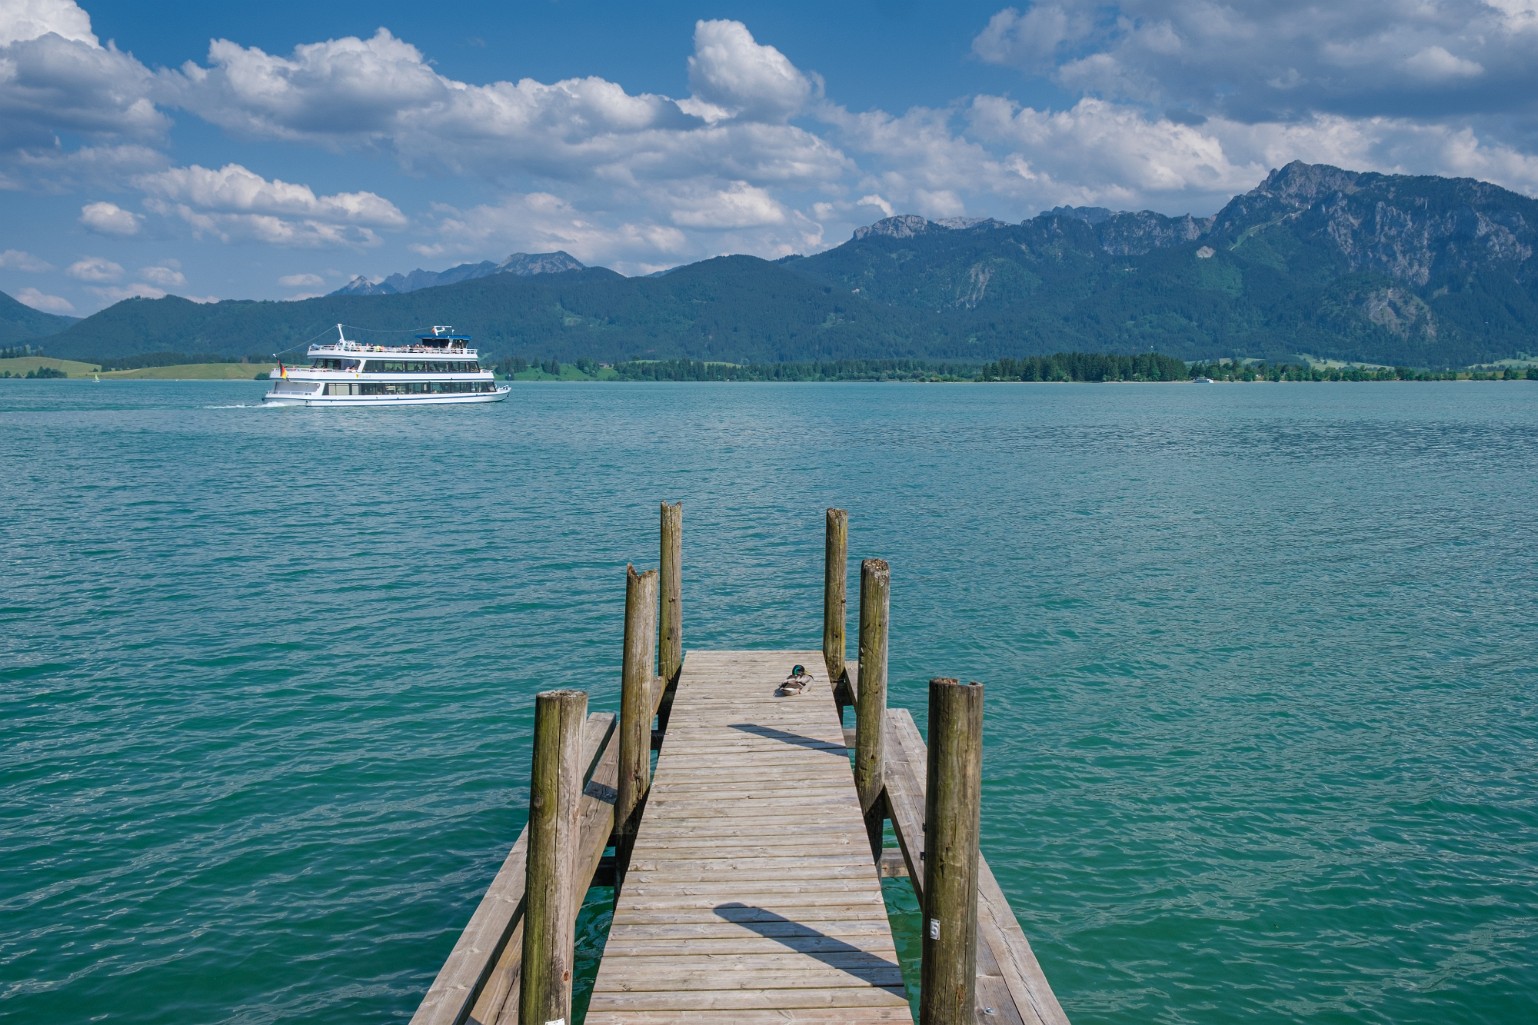 Forggensee_0591_2023-06-X-T4_21,4mm_f6,4_950s_160 ISO_LR_4kPx